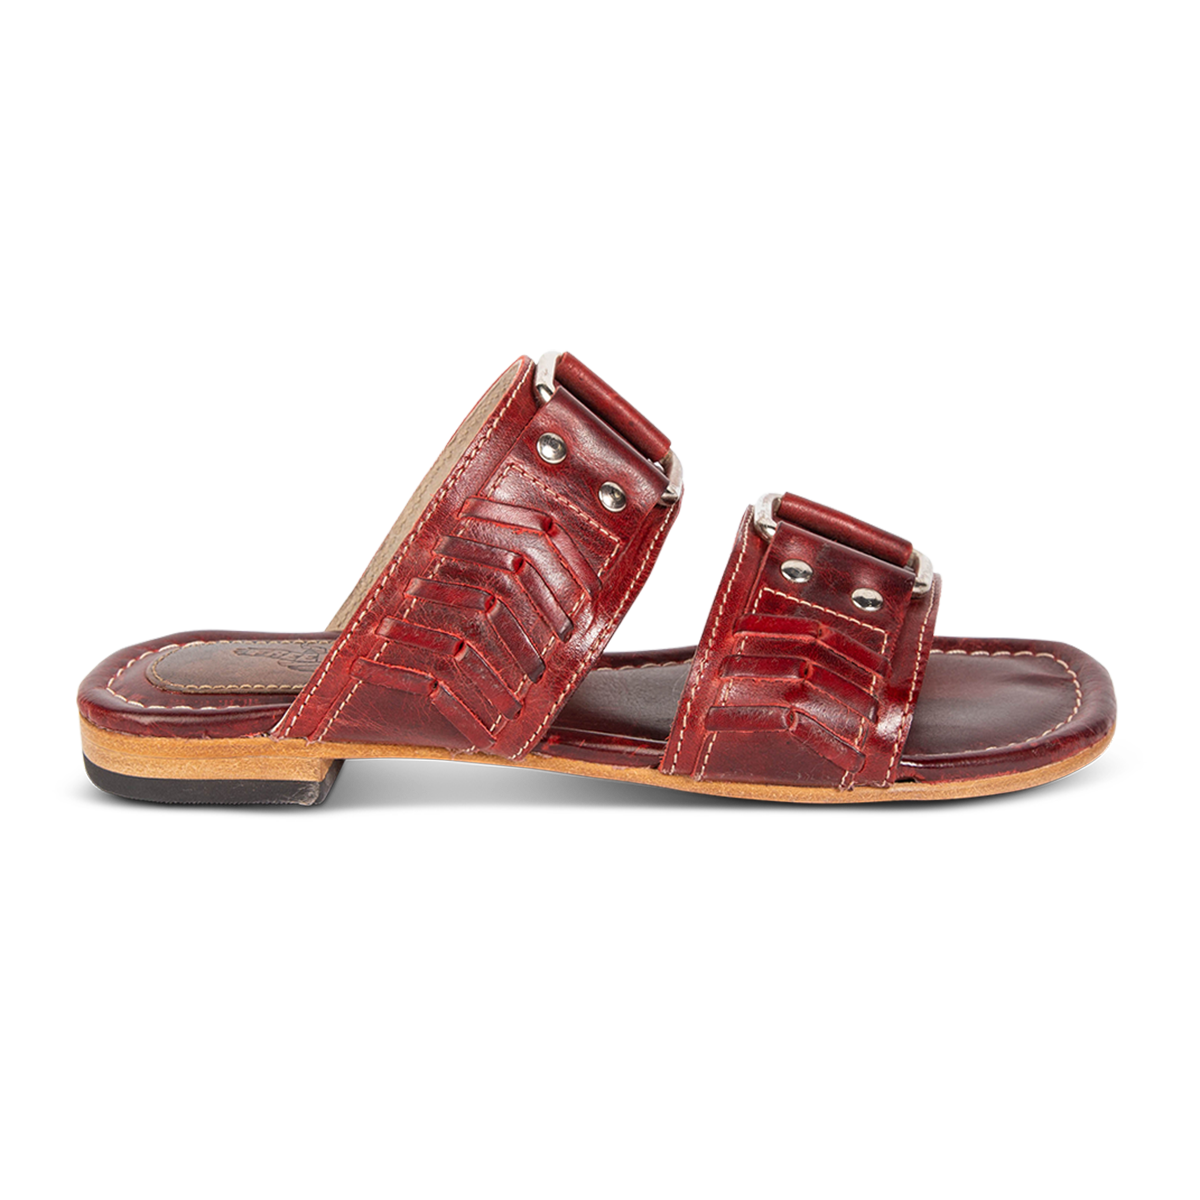 FREEBIRD women's Sage red low heeled slip-on sandal featuring double foot strap with metal accents